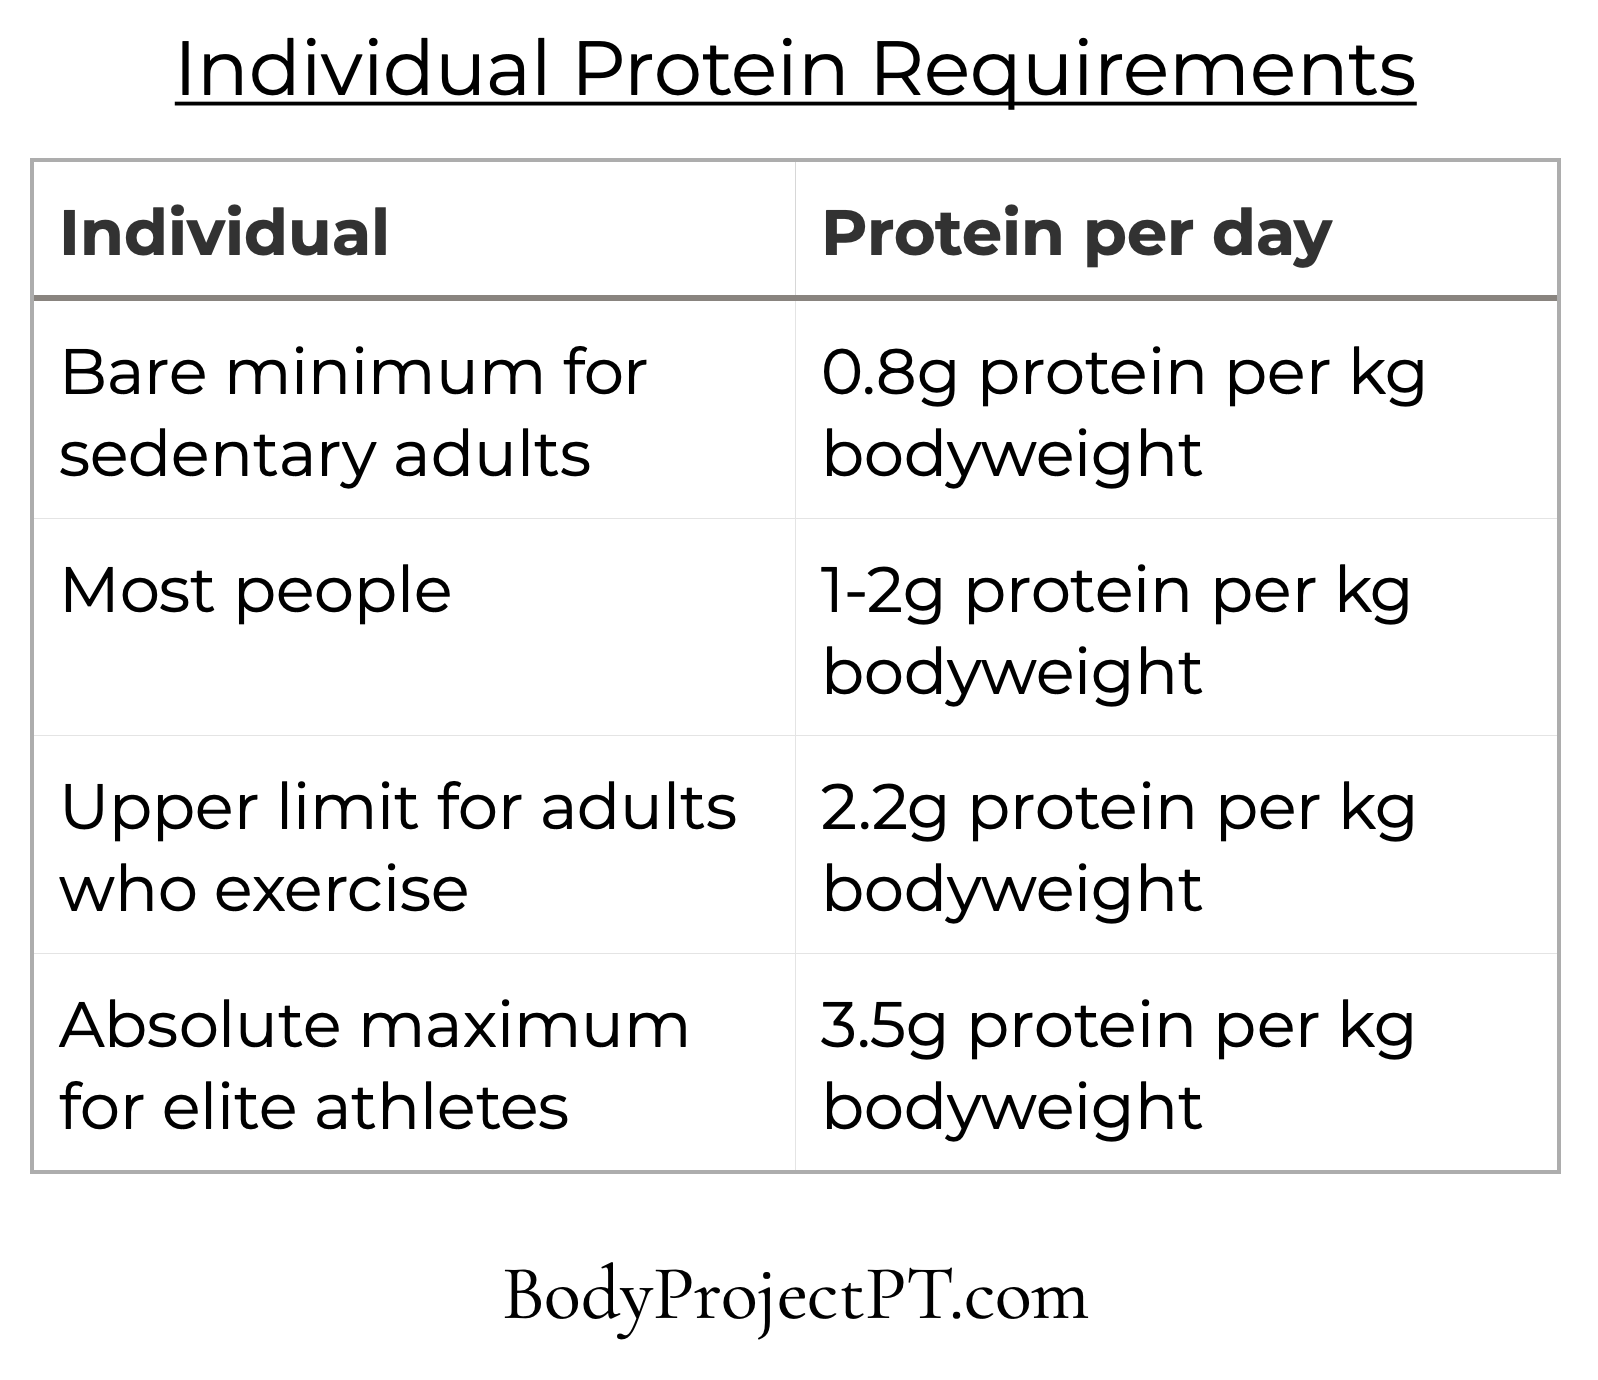 individual protein requirements chart